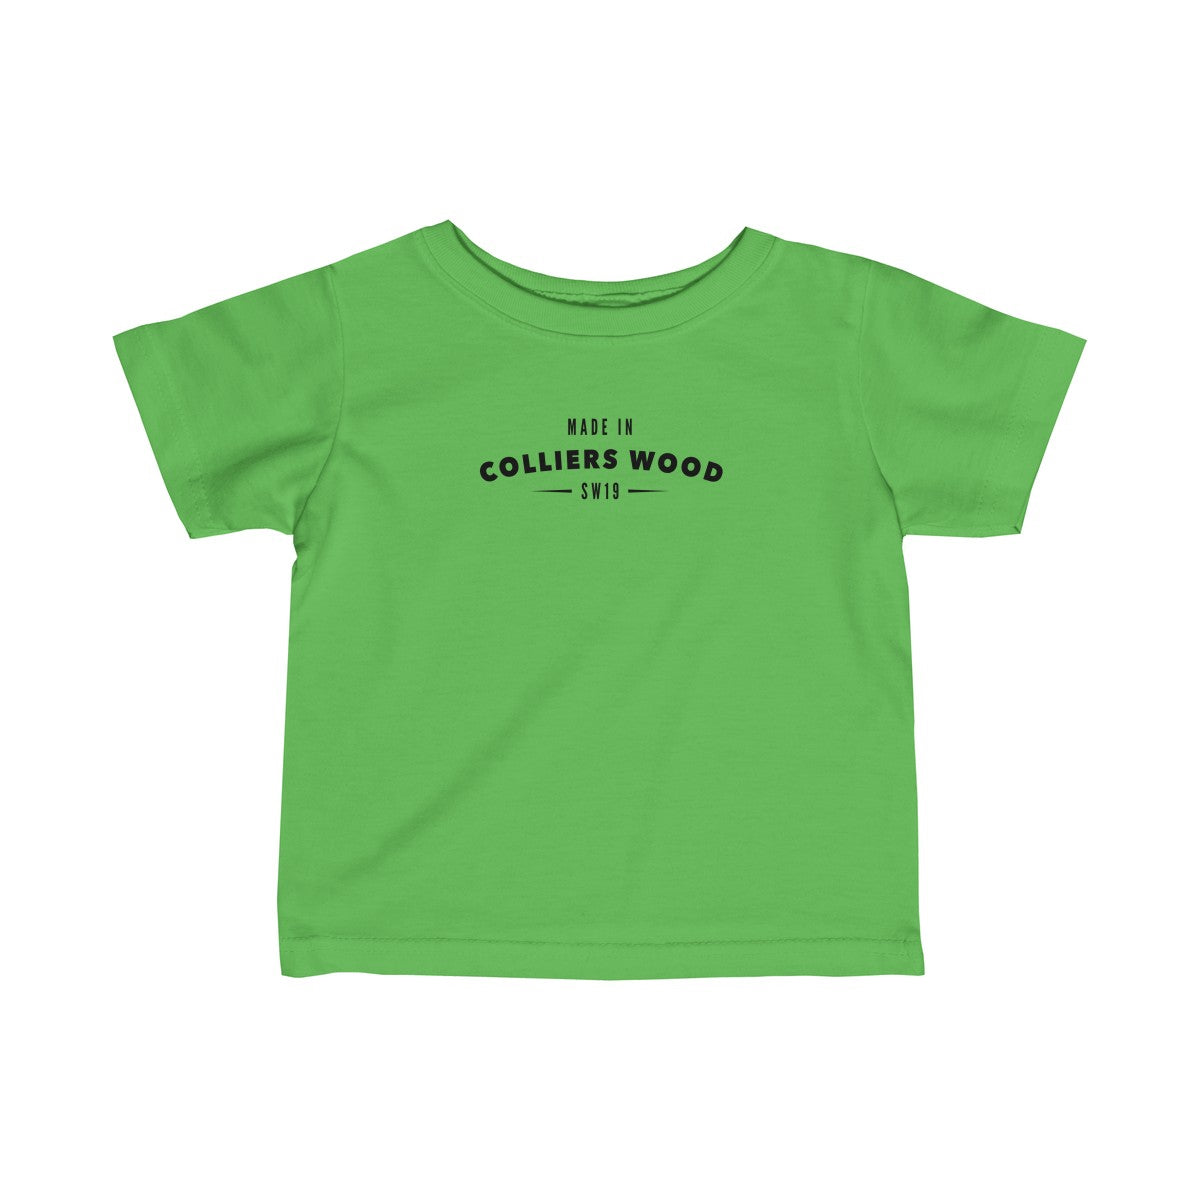 Made In Colliers Wood Infant T-Shirt